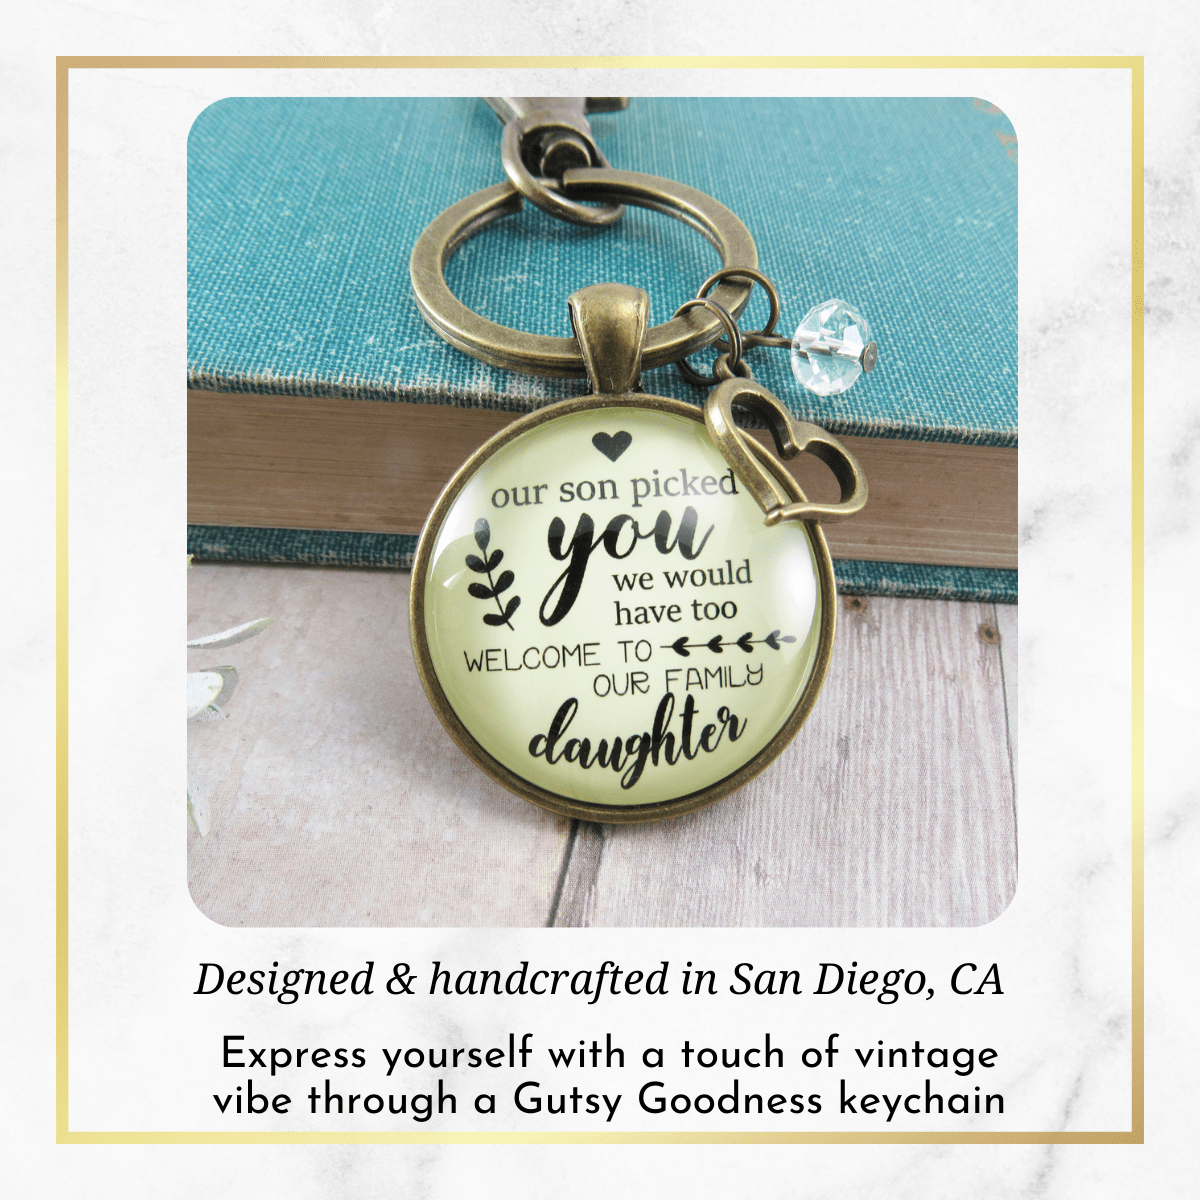 Daughter In Law Keychain Our Son Picked You Keepsake Wedding Jewelry Gift For Bride Heart - Gutsy Goodness Handmade Jewelry;Daughter In Law Keychain Our Son Picked You Keepsake Wedding Jewelry Gift For Bride Heart - Gutsy Goodness Handmade Jewelry Gifts